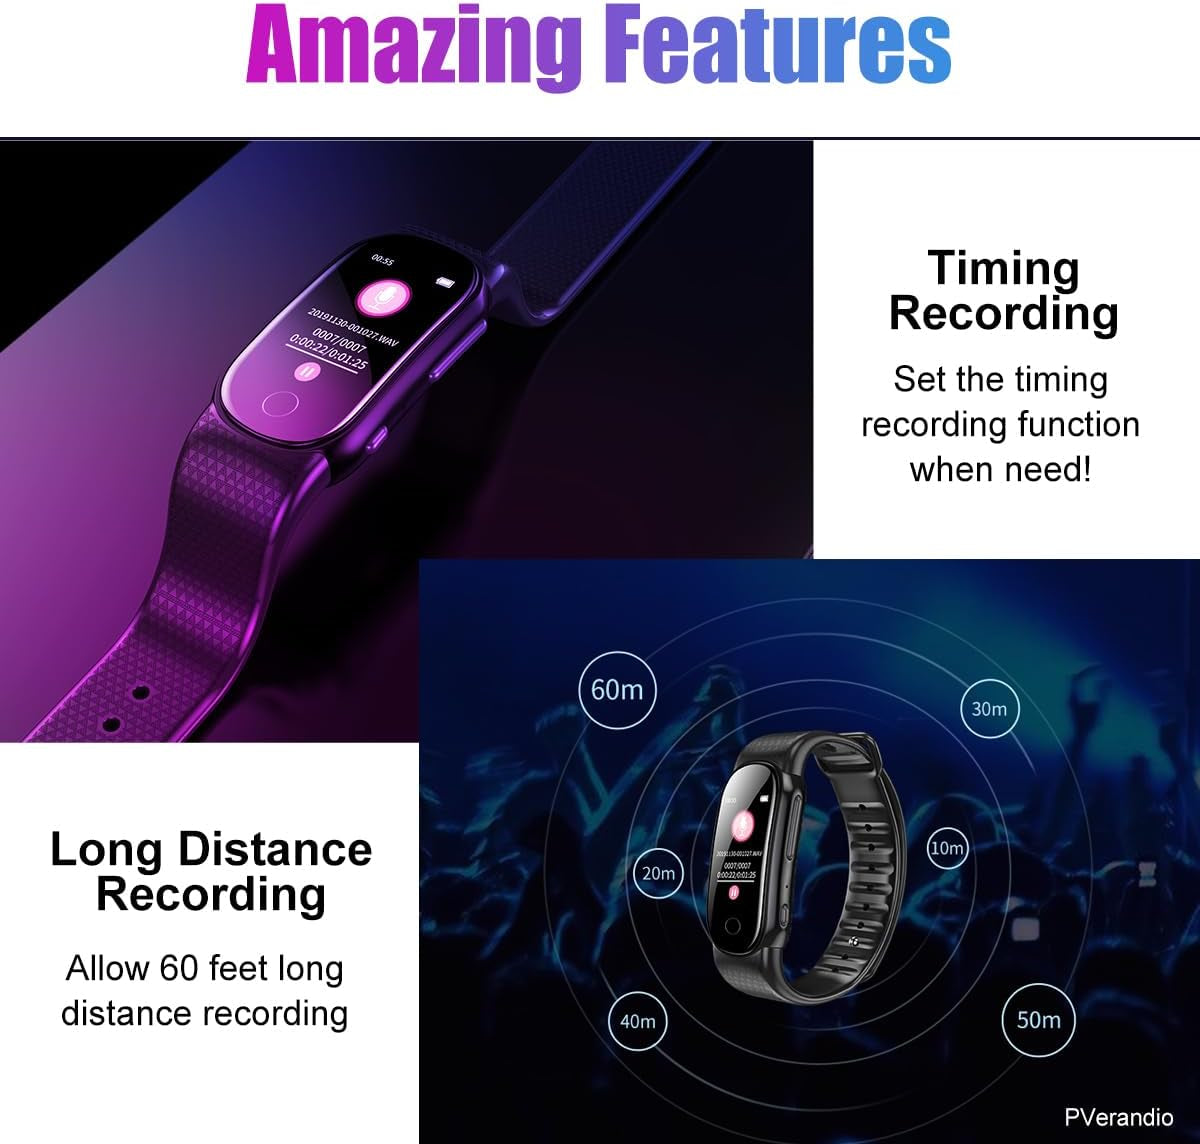 Voice Recorder Watch Voice Activated Recorder with 25 Hours Continuous Recording Time, MP3 Recorder with Timing Recording Audio Device (32GB)